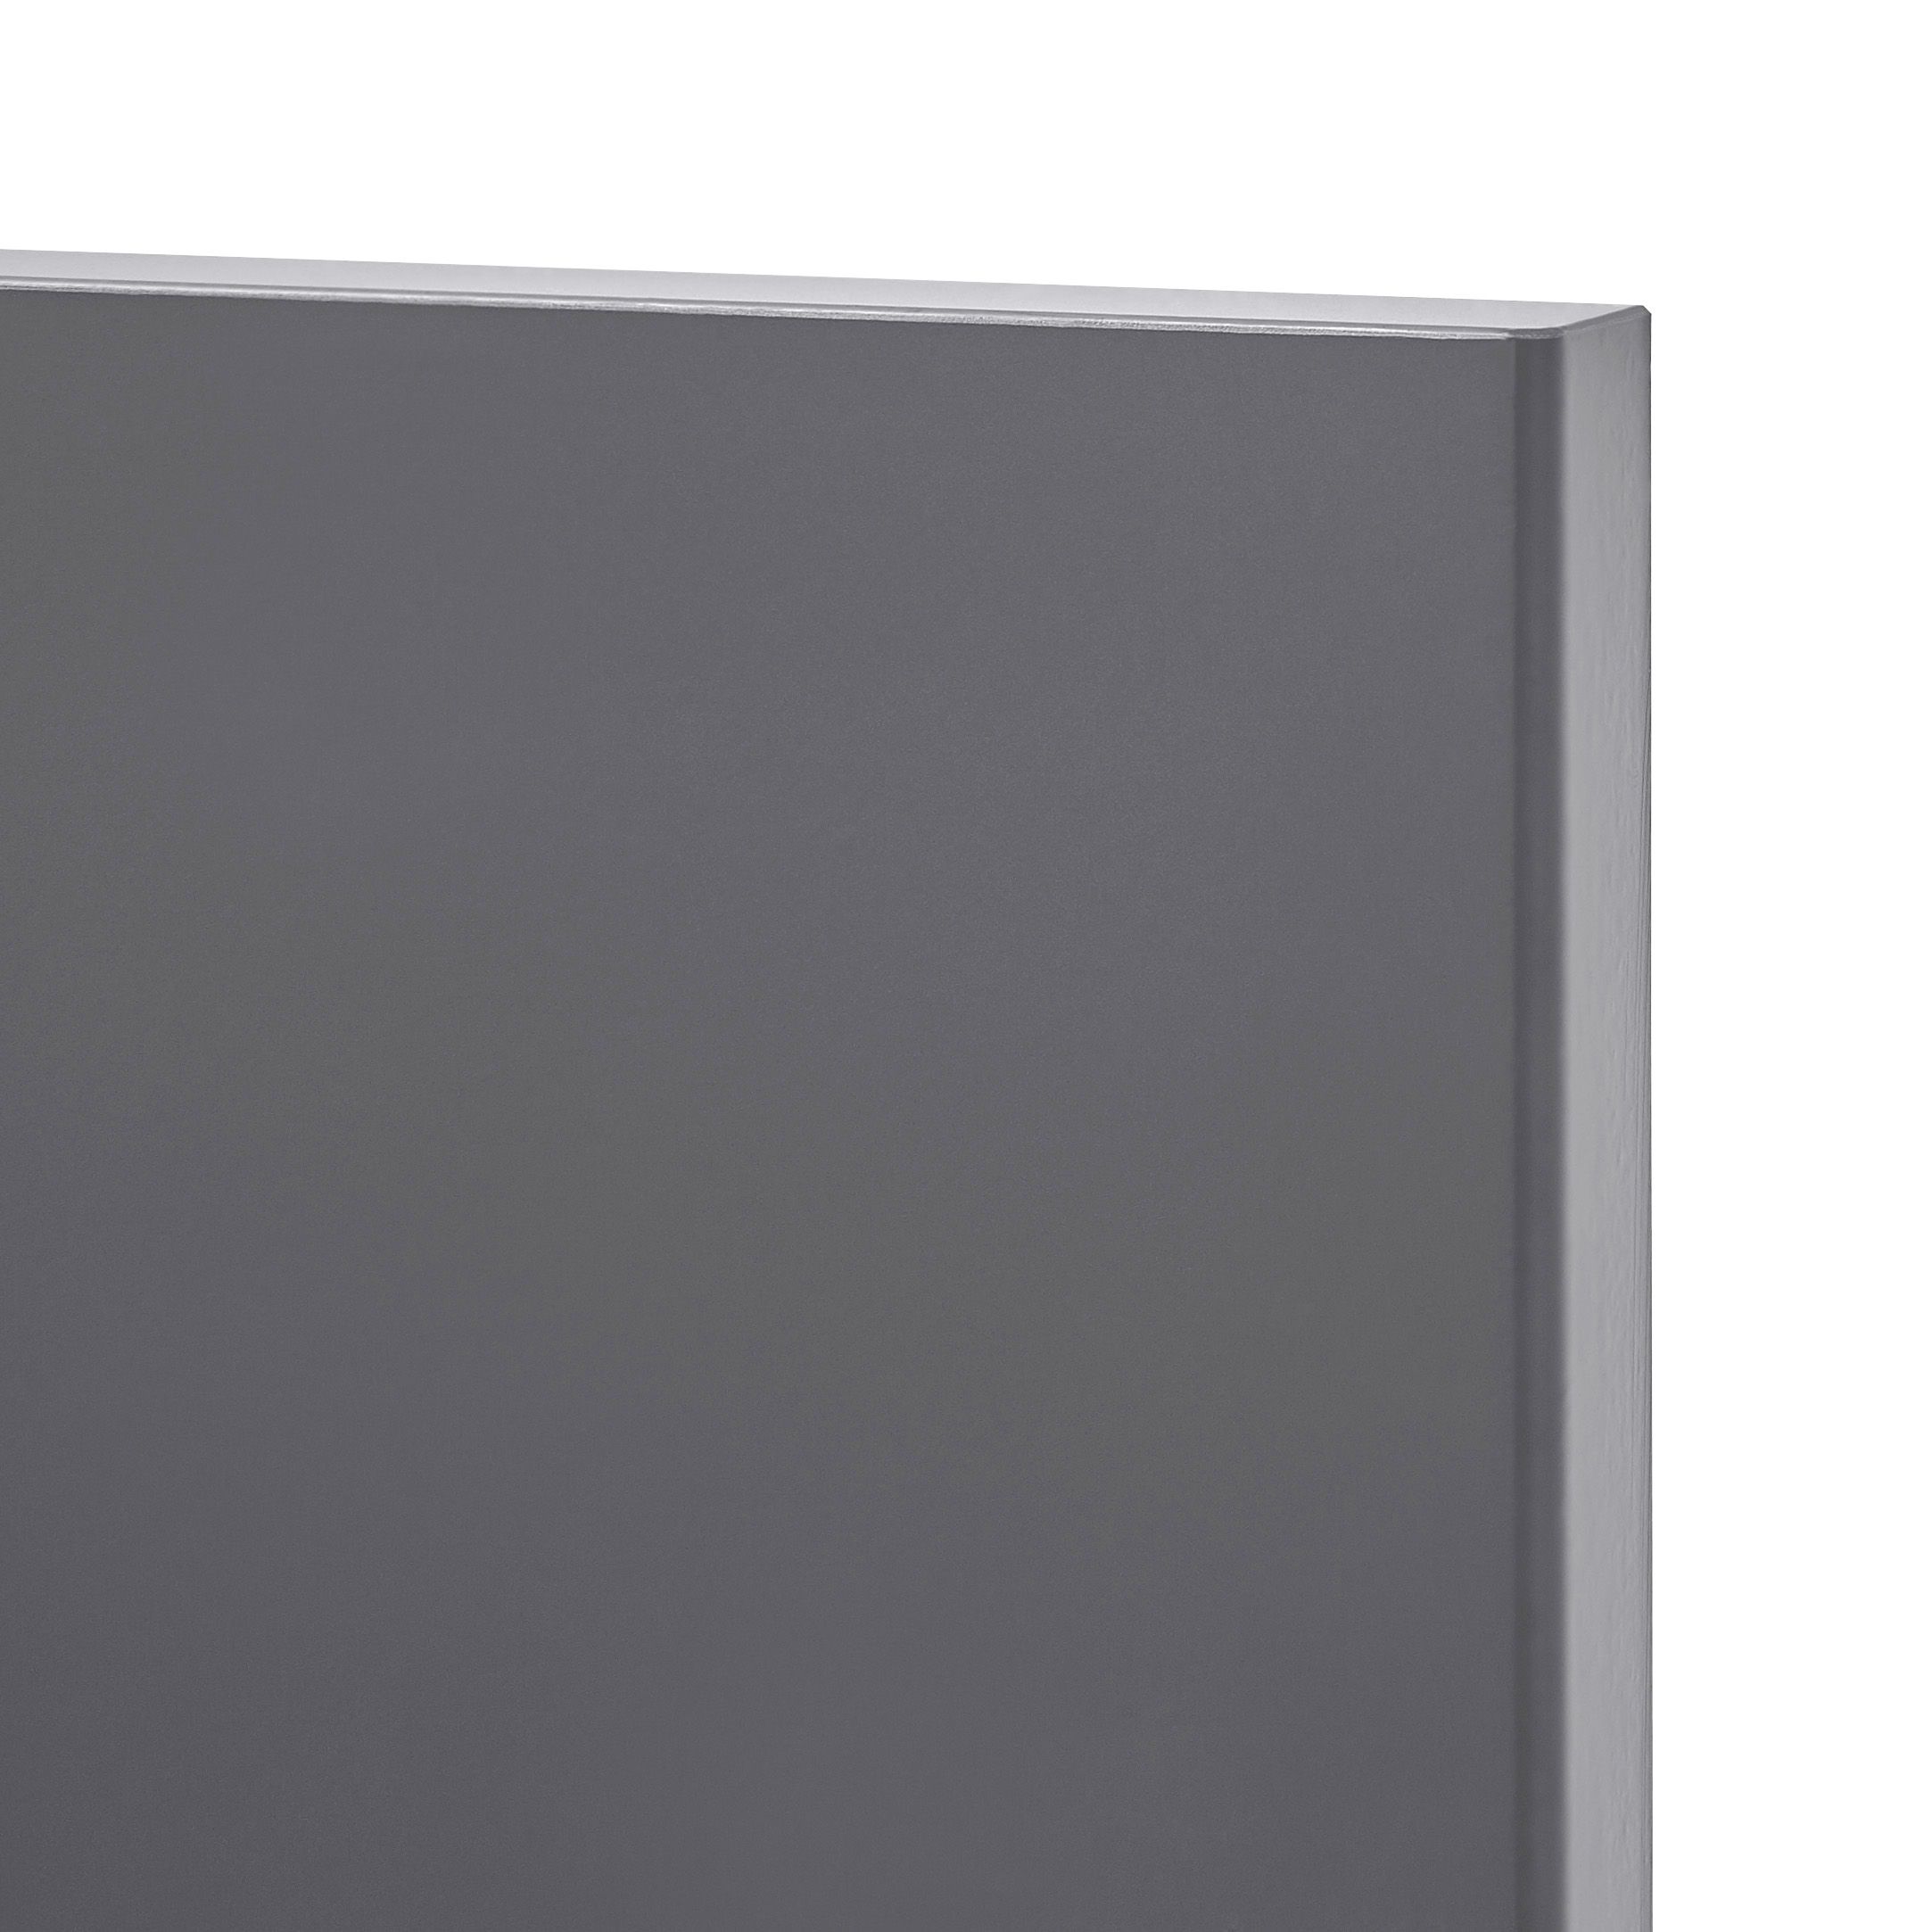 GoodHome Stevia Gloss anthracite slab Highline Cabinet door (W)250mm (H)715mm (T)18mm